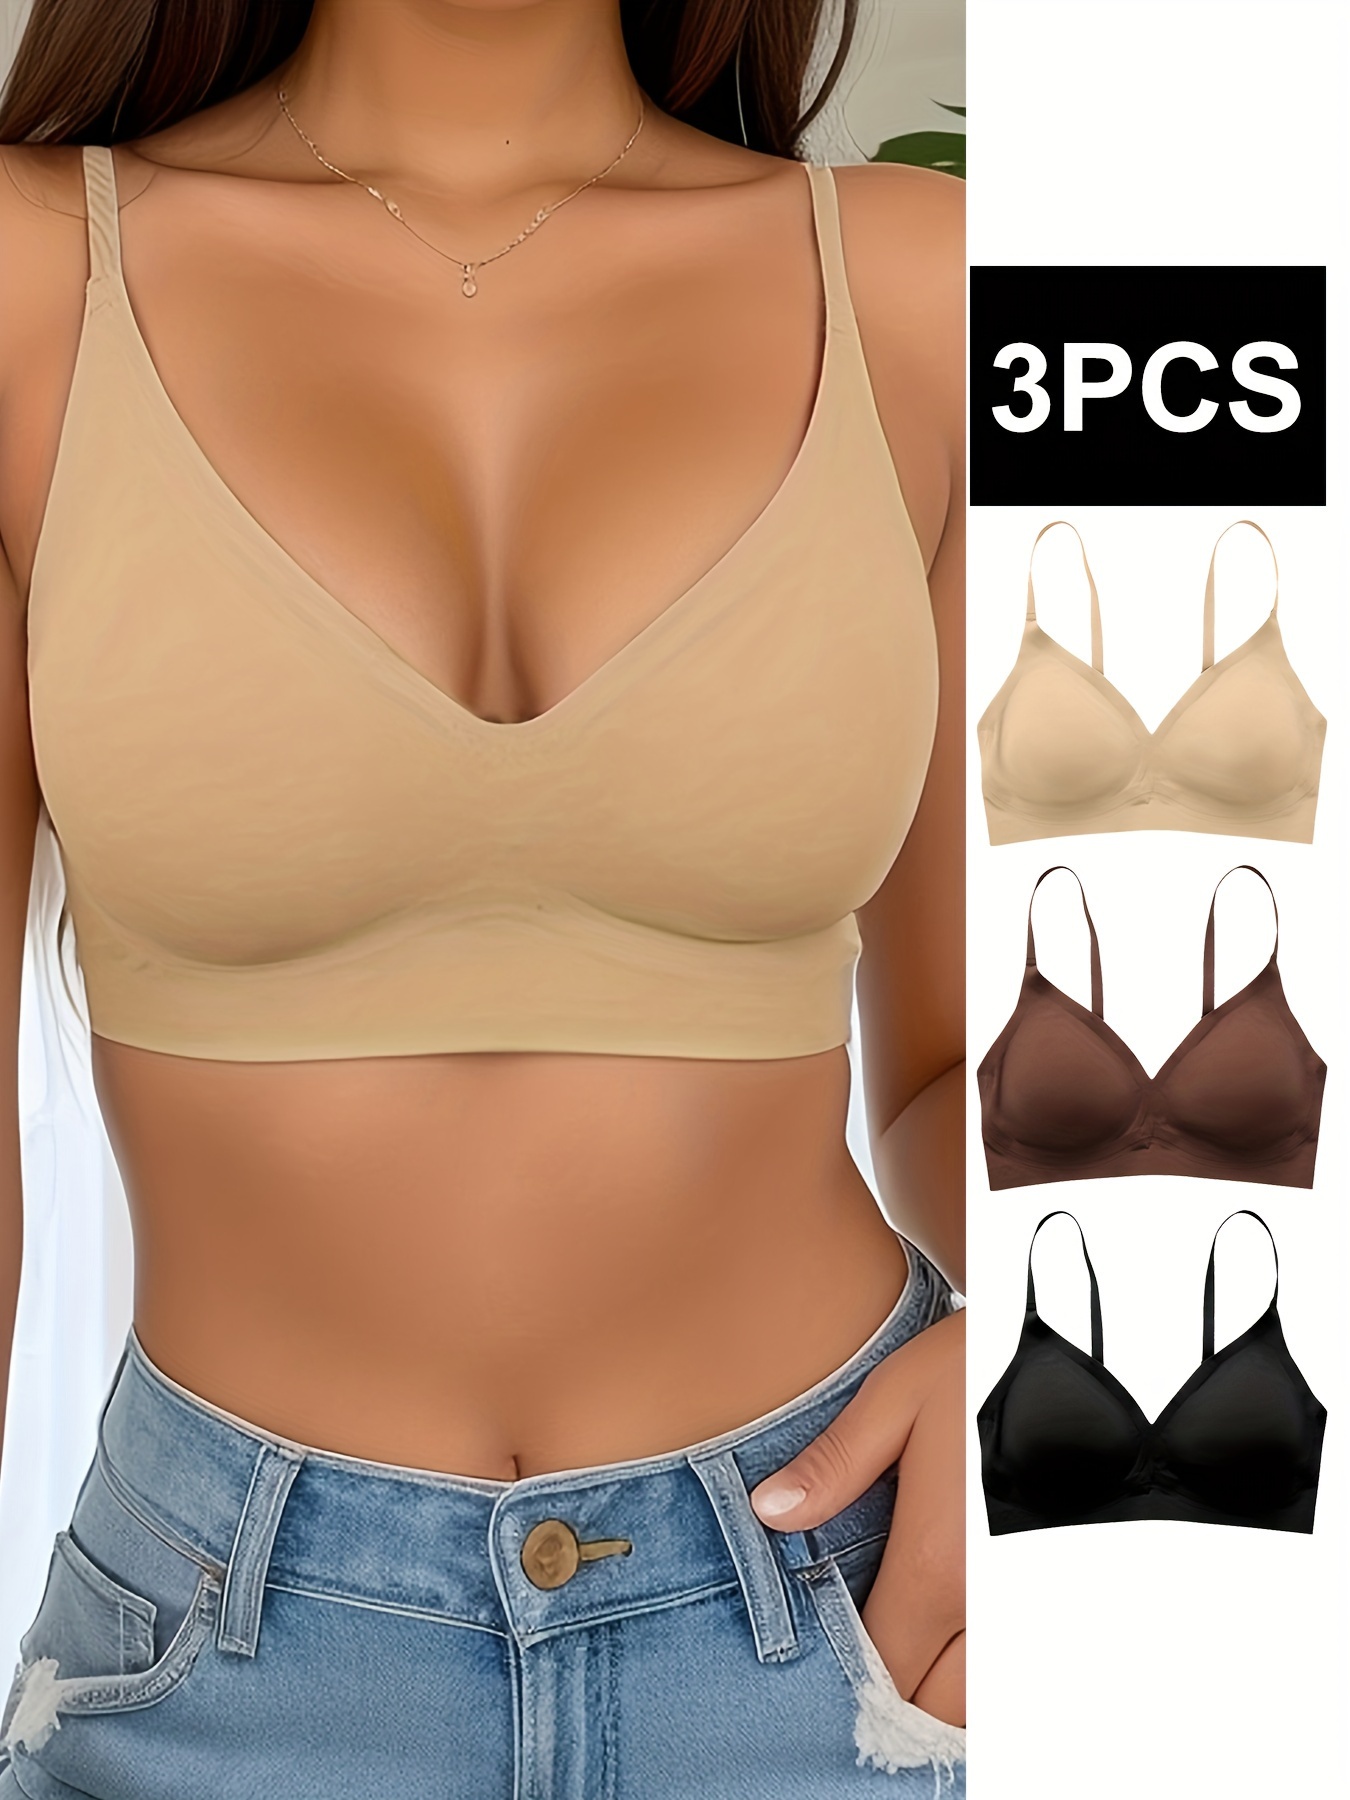 3pcs Seamless Solid Wireless Bras, Comfy & Breathable Push Up Intimates  Bra, Women's Lingerie & Underwear